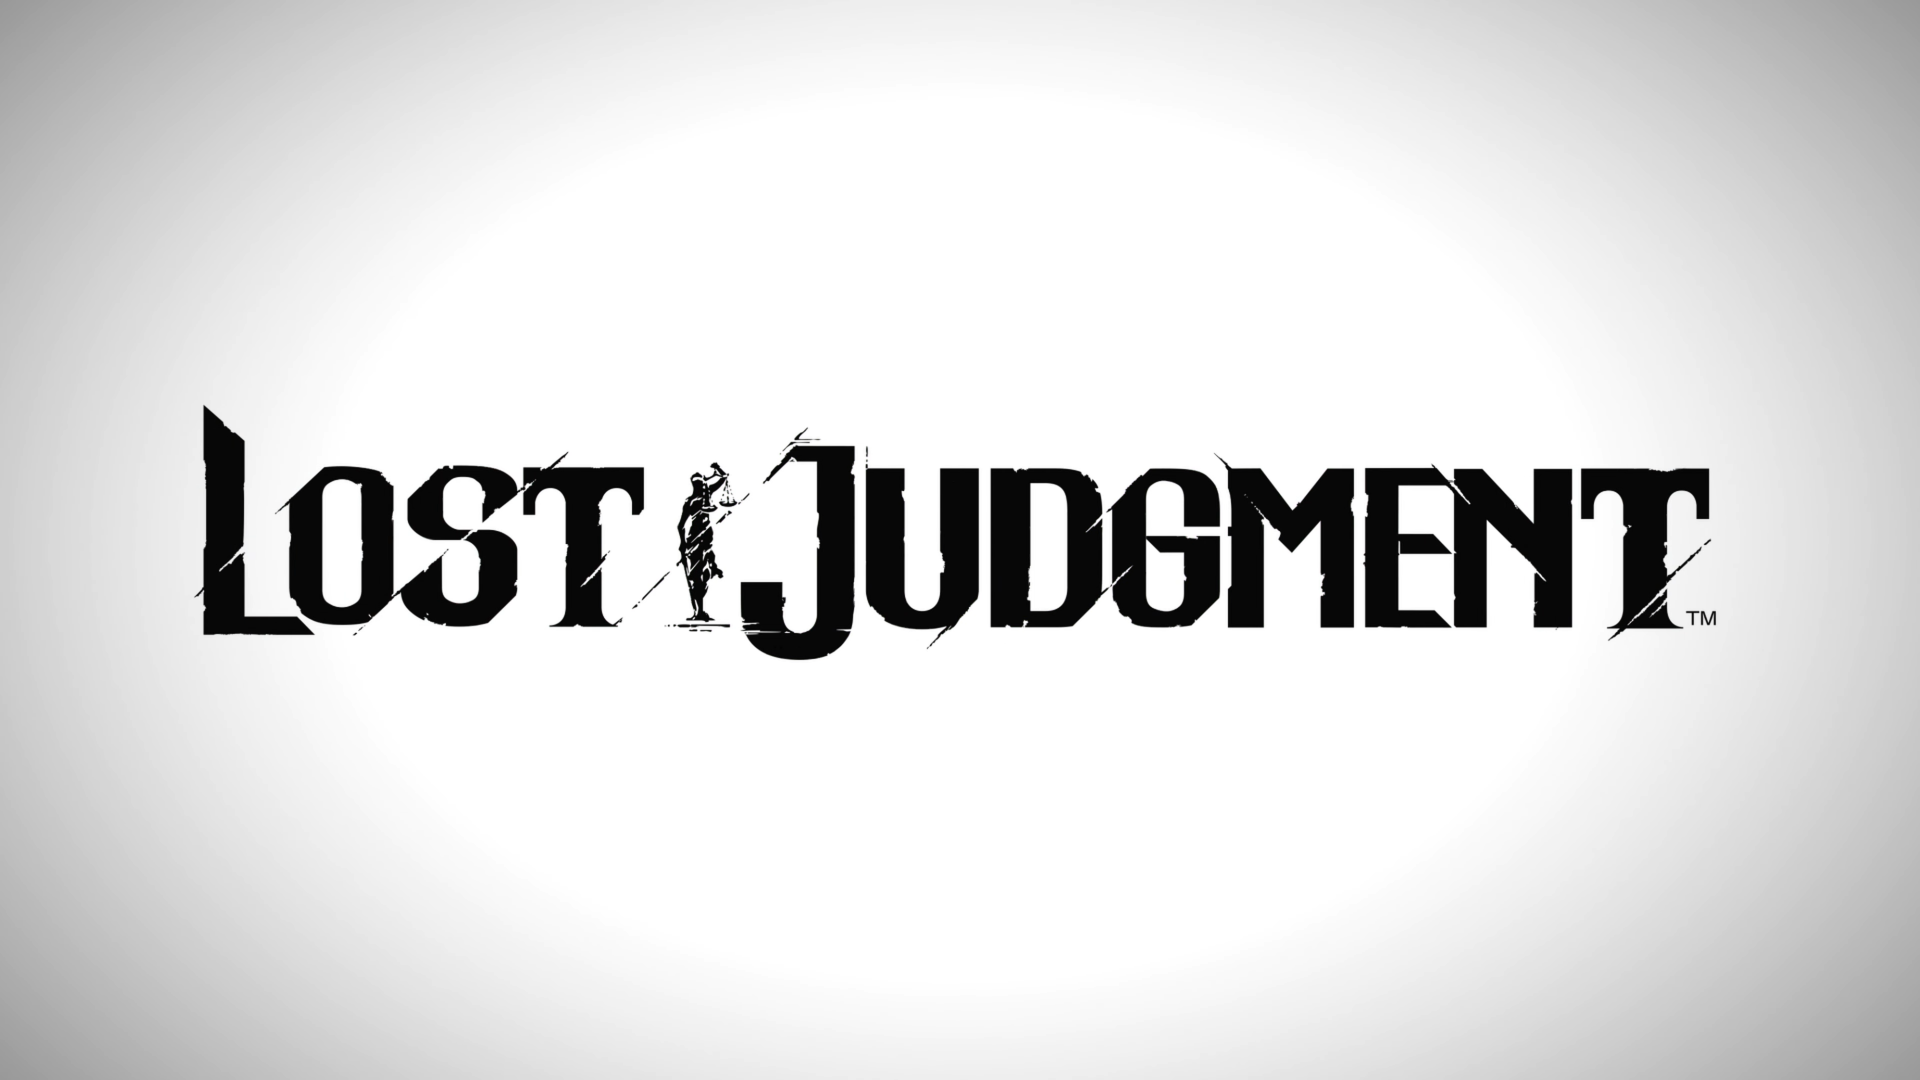 lost-judgment-announced-feature-image.pn